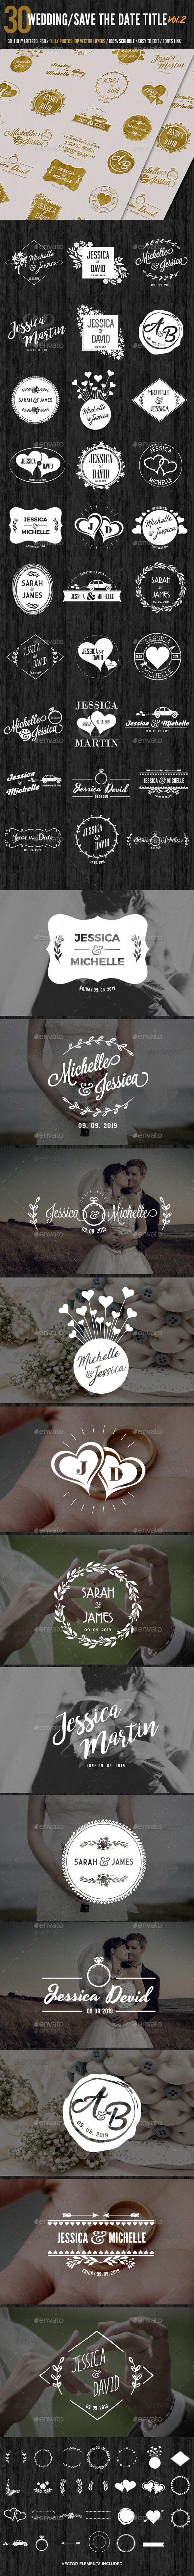 Wedding/Save the Date Titles/Typography Vol2